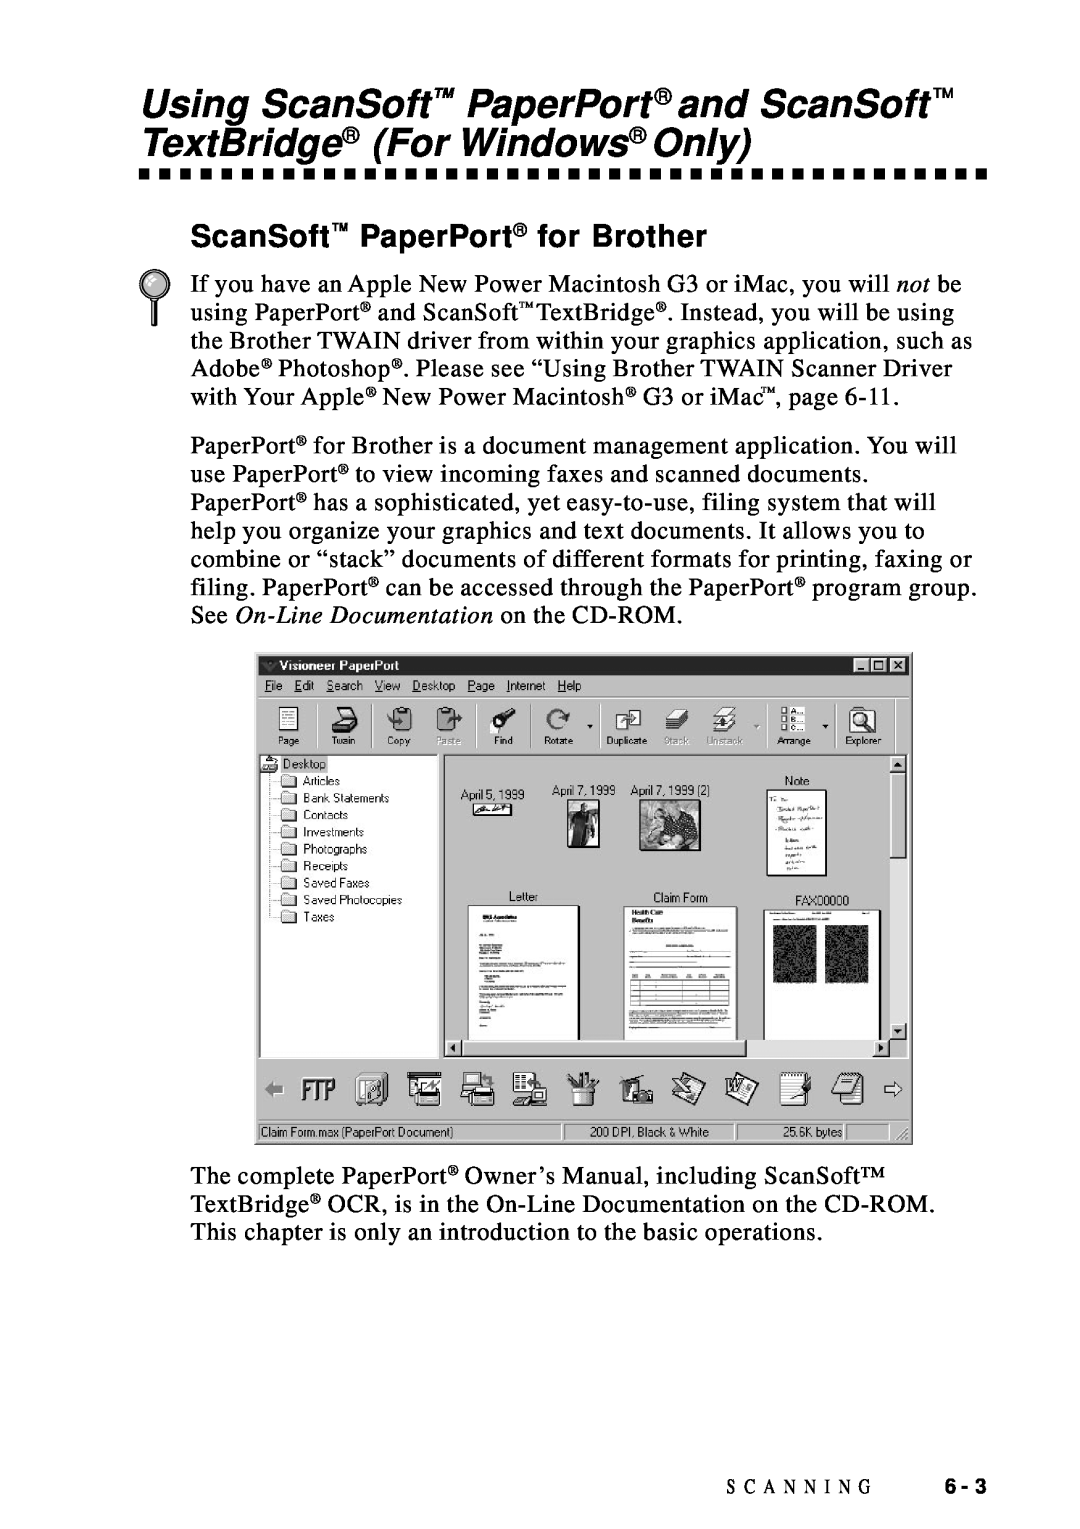 Brother DCP1200 manual Using ScanSoft PaperPort and ScanSoft TextBridge For Windows Only, ScanSoft PaperPort for Brother 